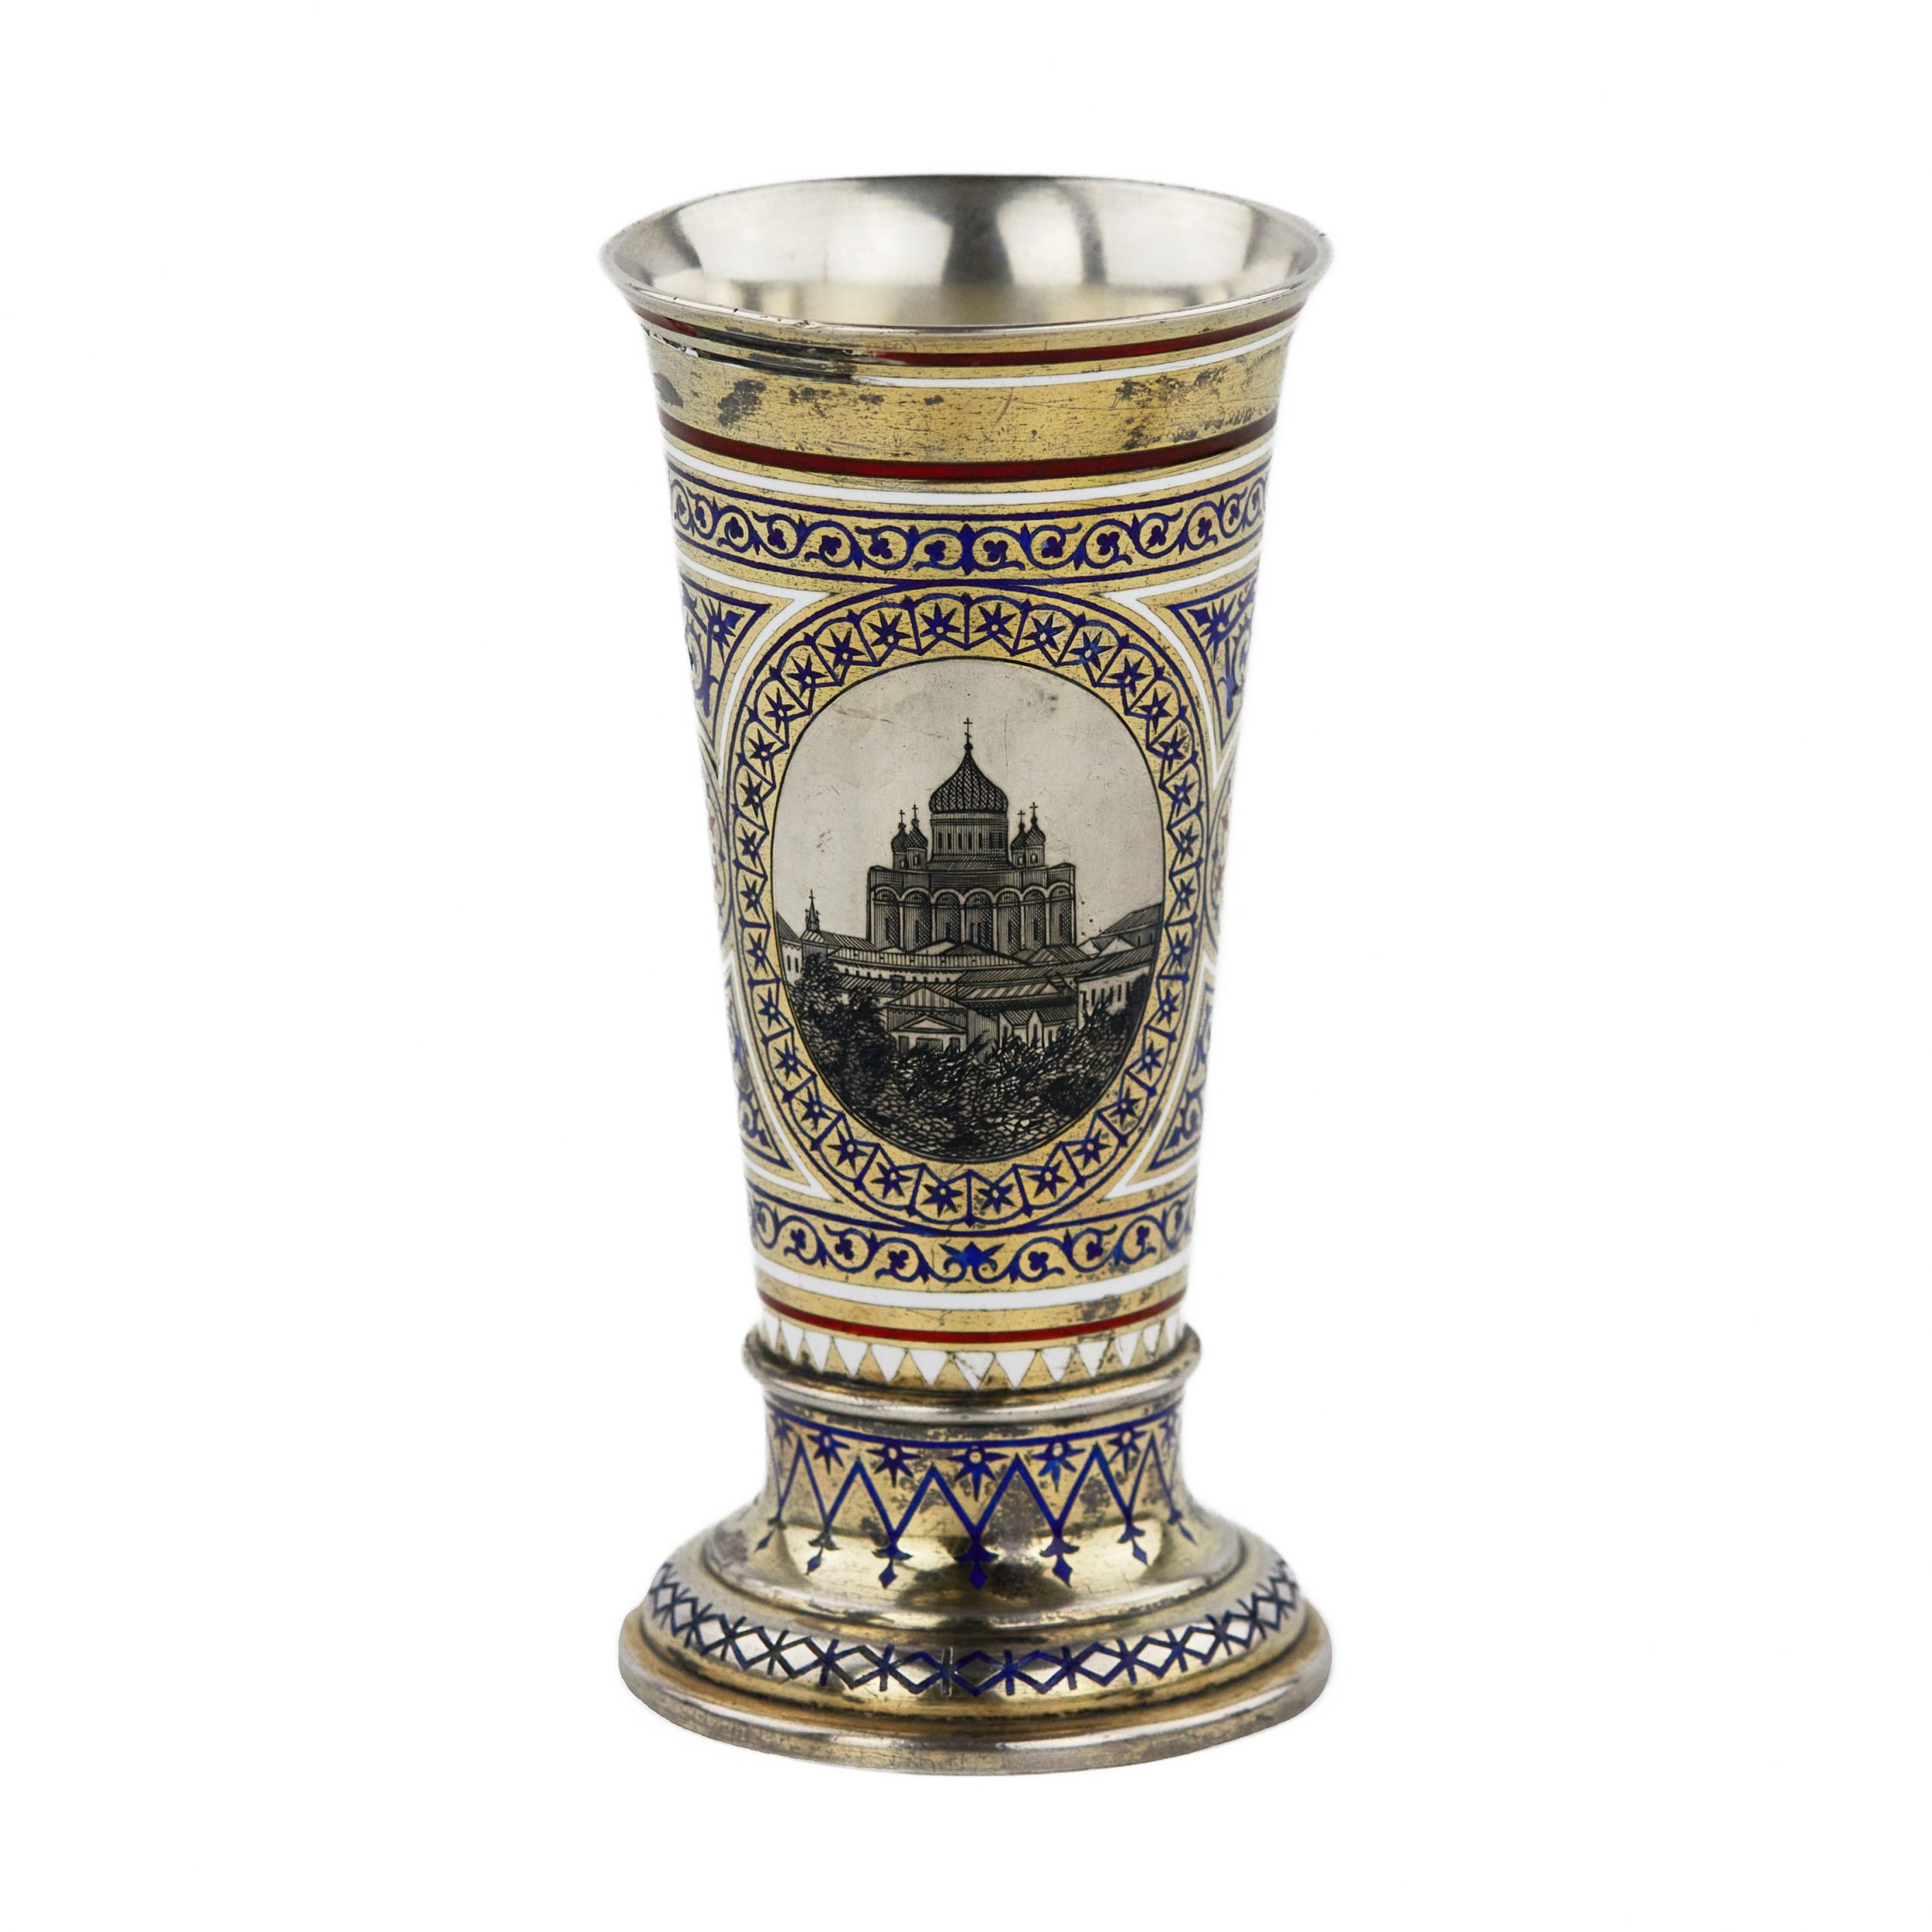 PAVEL-OVCHINNIKOV-Russian-silver-gilded-and-champlevé-goblet-of-the-19th-century-stamped-by-Pavel-Ovchinnikov-Moscow-1872-Imperial-diploma-